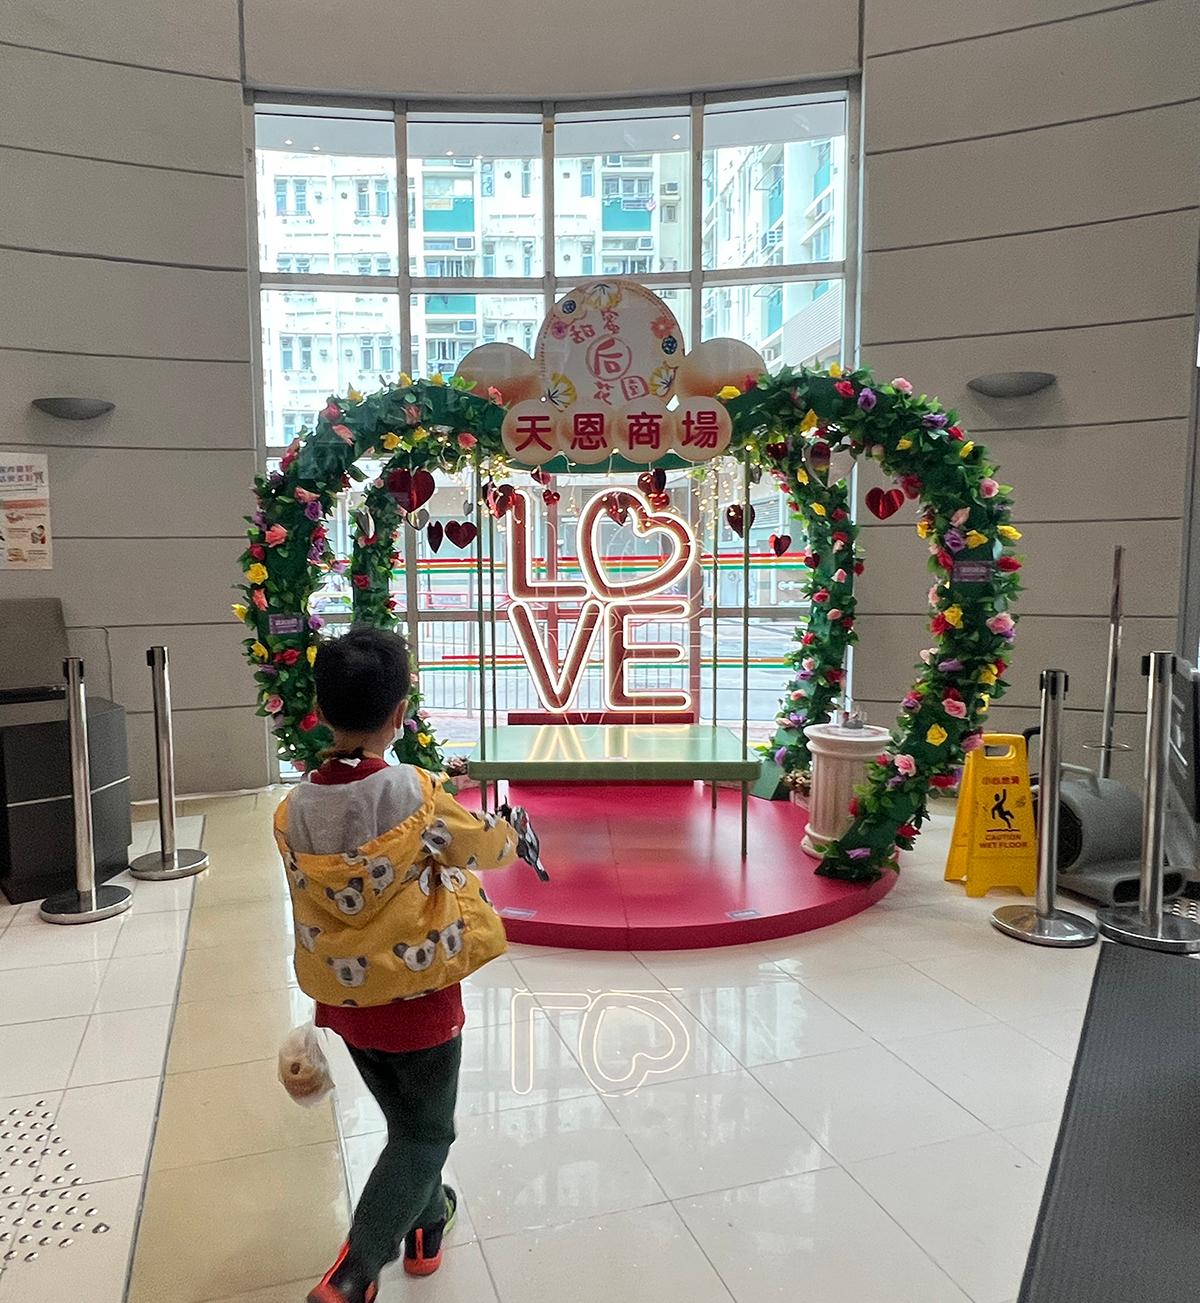 The Hong Kong Housing Authority (HA) will launch promotions in its shopping centres for Mother's Day to express gratitude to mothers and boost patronage. Photo shows decorations for Mother's Day at the HA's Tin Yan Shopping Centre, Tin Shui Wai.